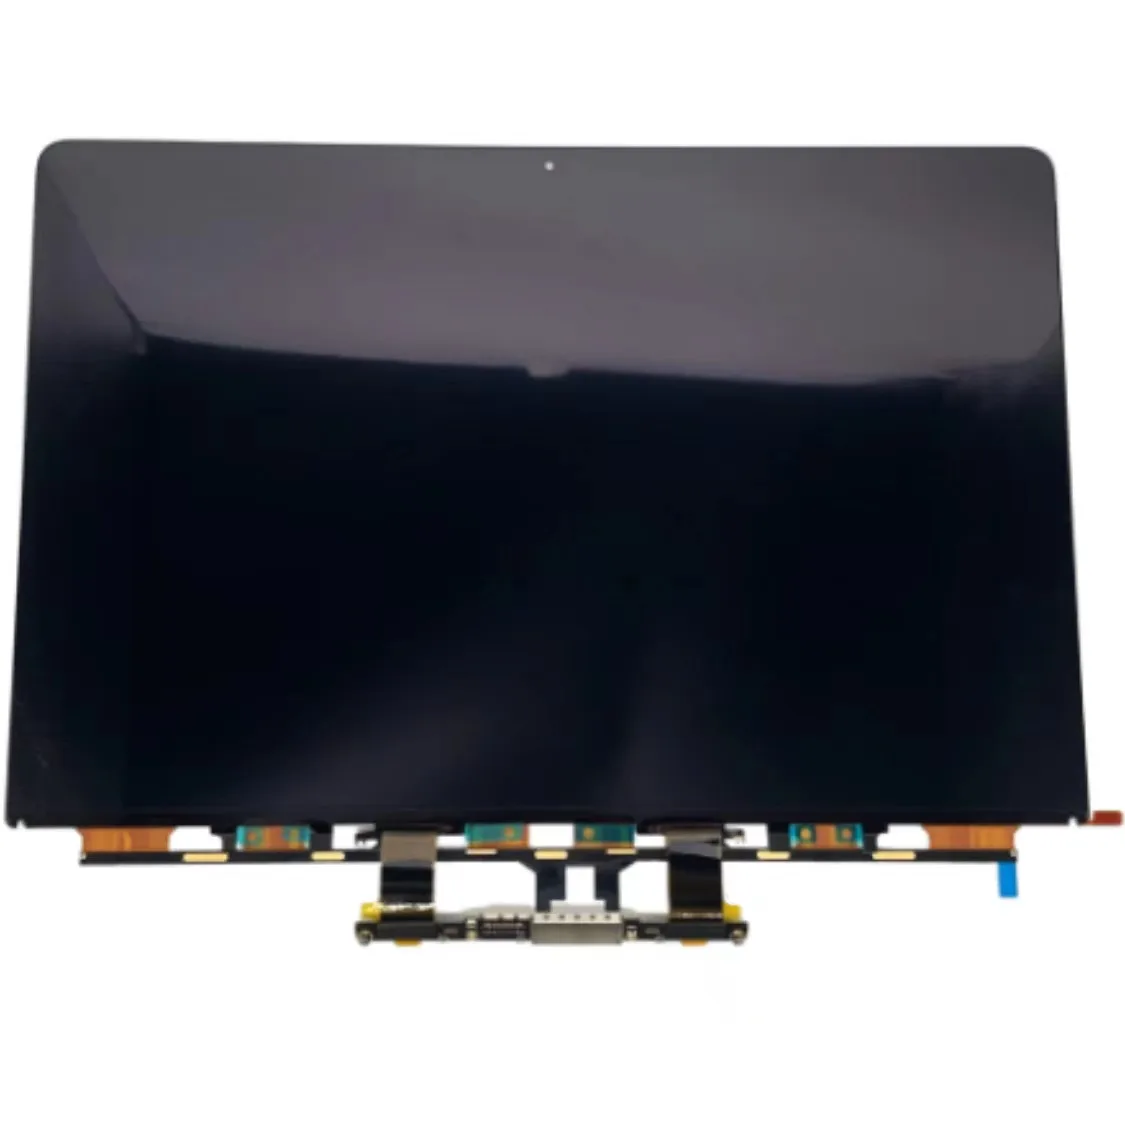 new-new-late-2018-year-a1932-lcd-led-screen-glass-for-macbook-air-retina-133-a1932-lcd-display-screen-panel-emc3184-mre82